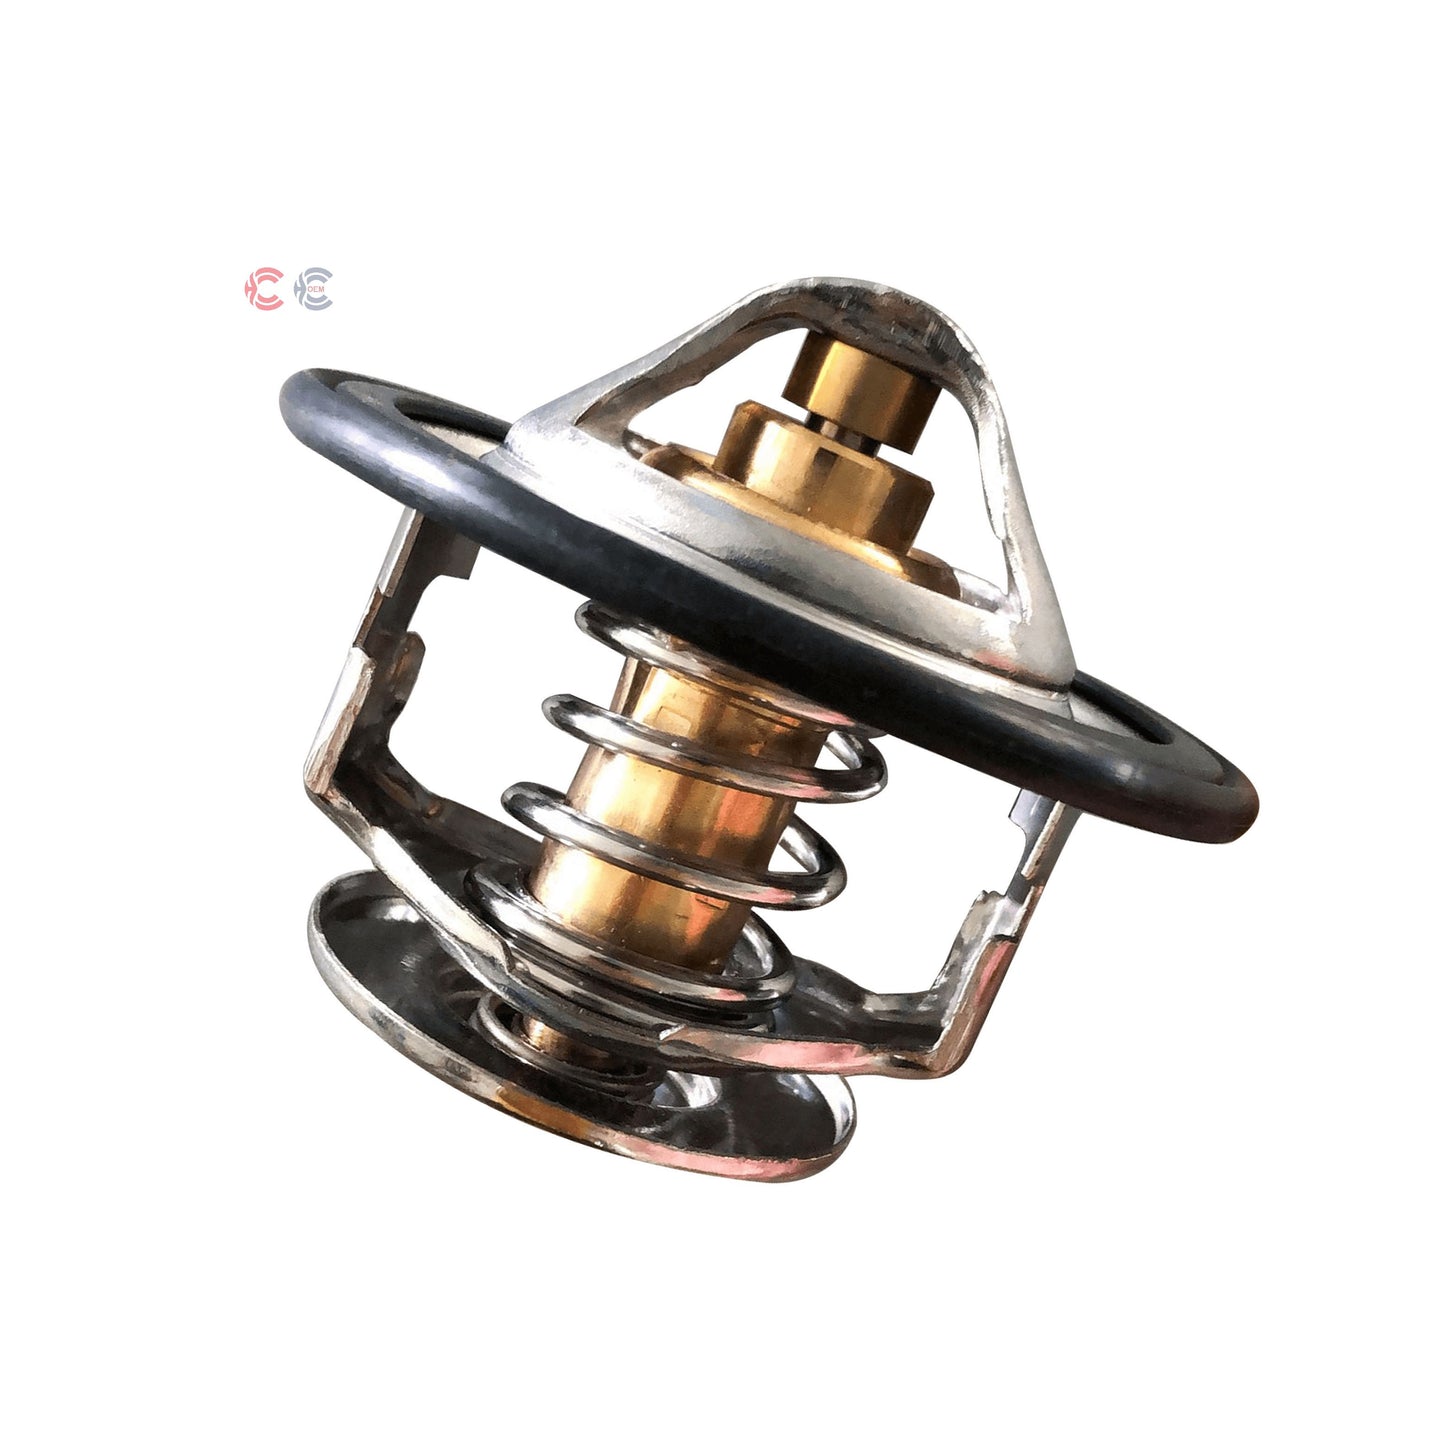 OEM: S1632-E9020Material: ABS MetalColor: black silver goldenOrigin: Made in ChinaWeight: 200gPacking List: 1* Thermostat More ServiceWe can provide OEM Manufacturing serviceWe can Be your one-step solution for Auto PartsWe can provide technical scheme for you Feel Free to Contact Us, We will get back to you as soon as possible.